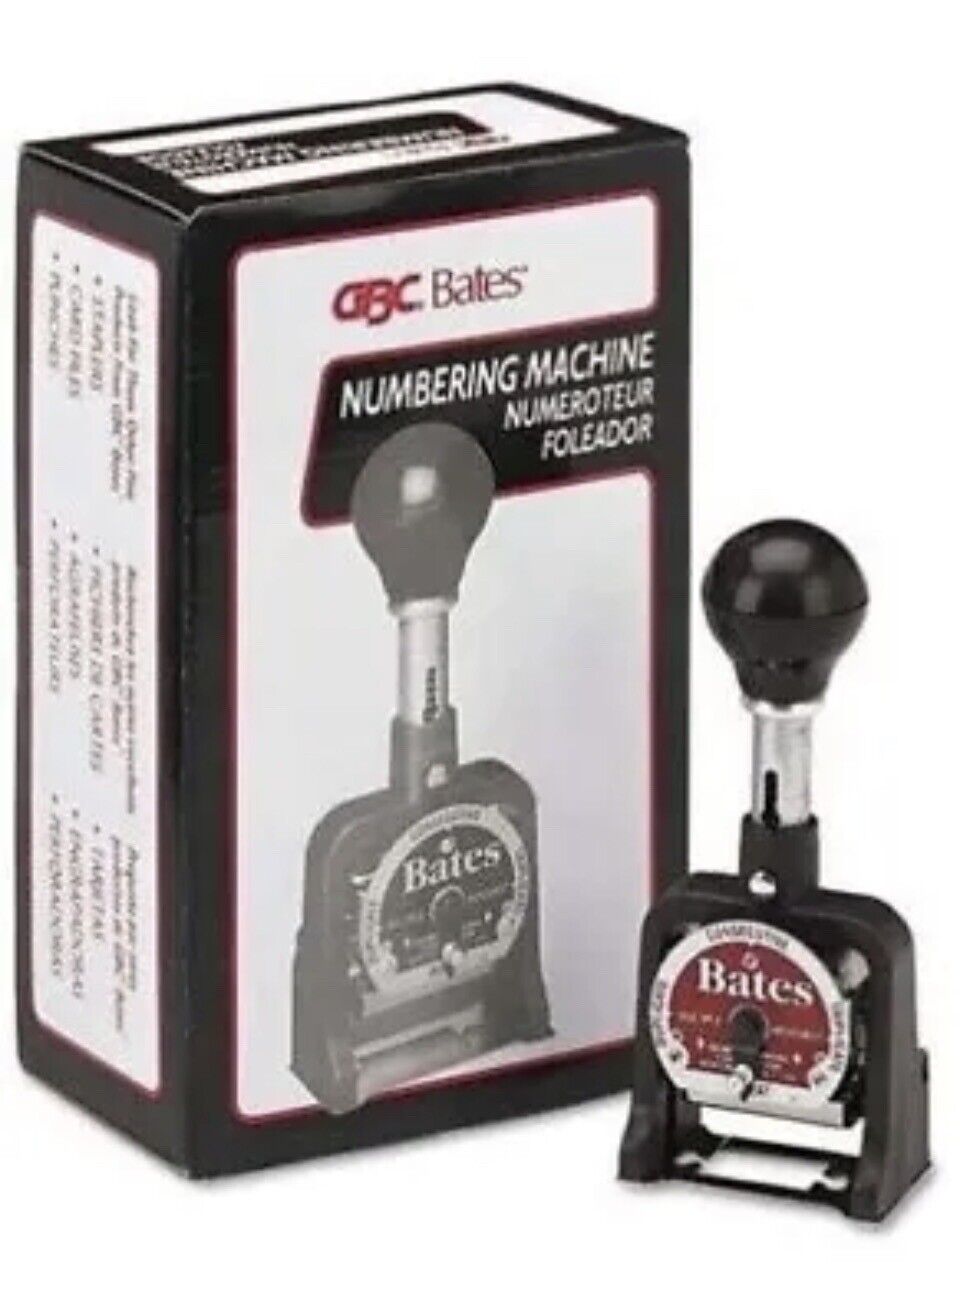 GBC Bates Multiple Movement Numbering Machine NEW IN BOX Vintage Office Stamp